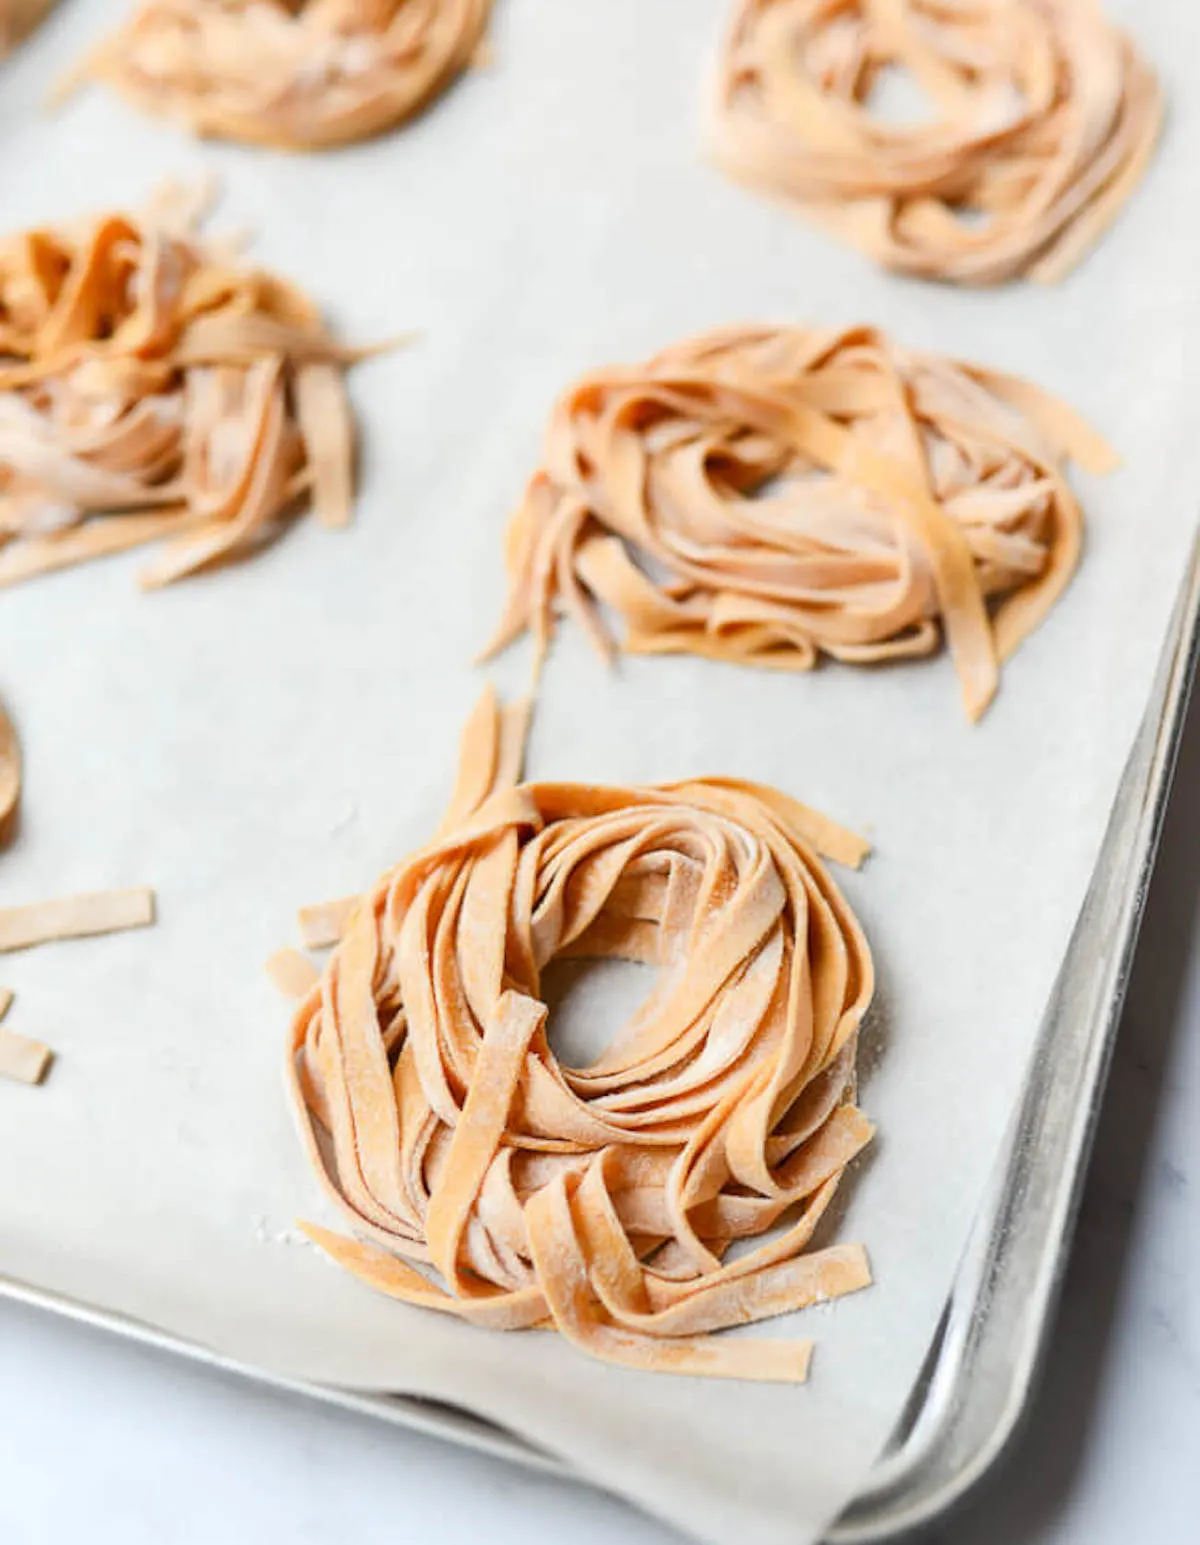 Pumpkin pasta fettuccine arranged in small piles over parchment paper on metal baking sheet.